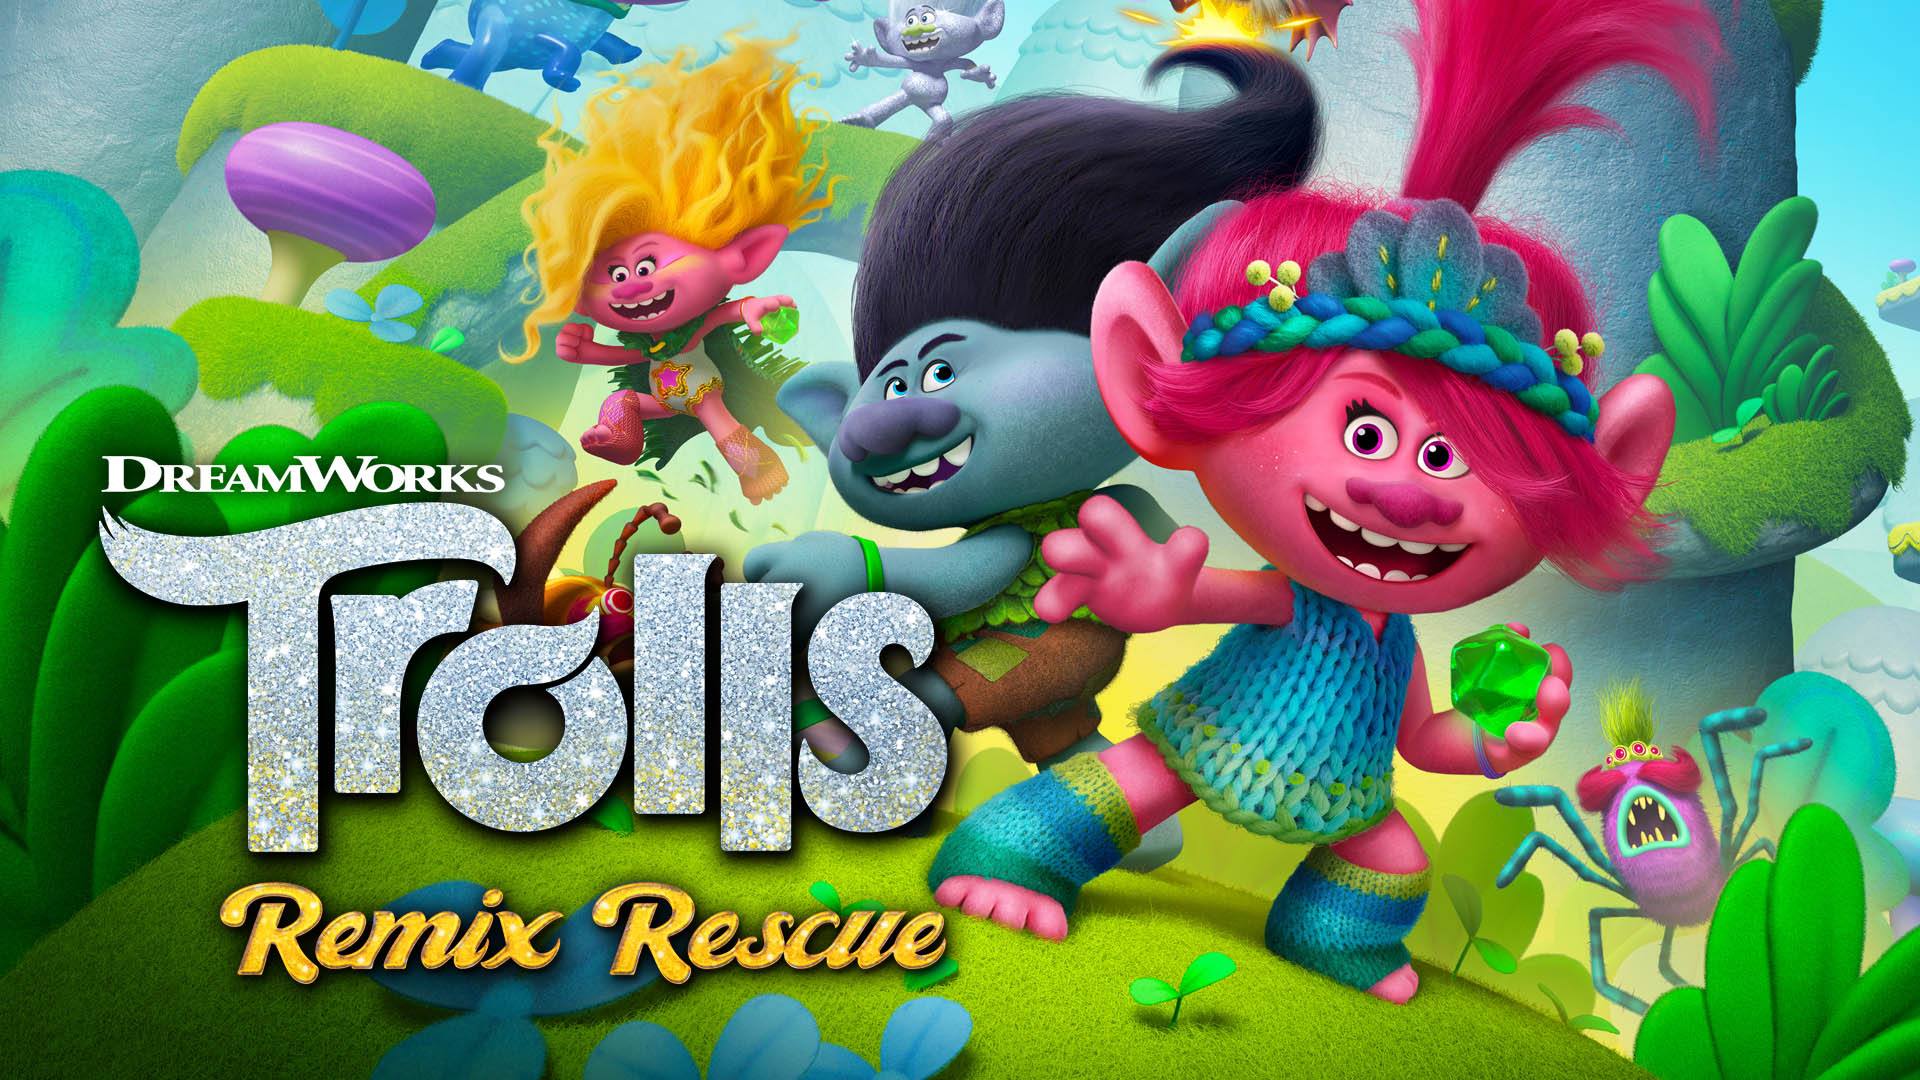 DreamWorks Trolls Remix Rescue announced for PC and consoles - Niche Gamer